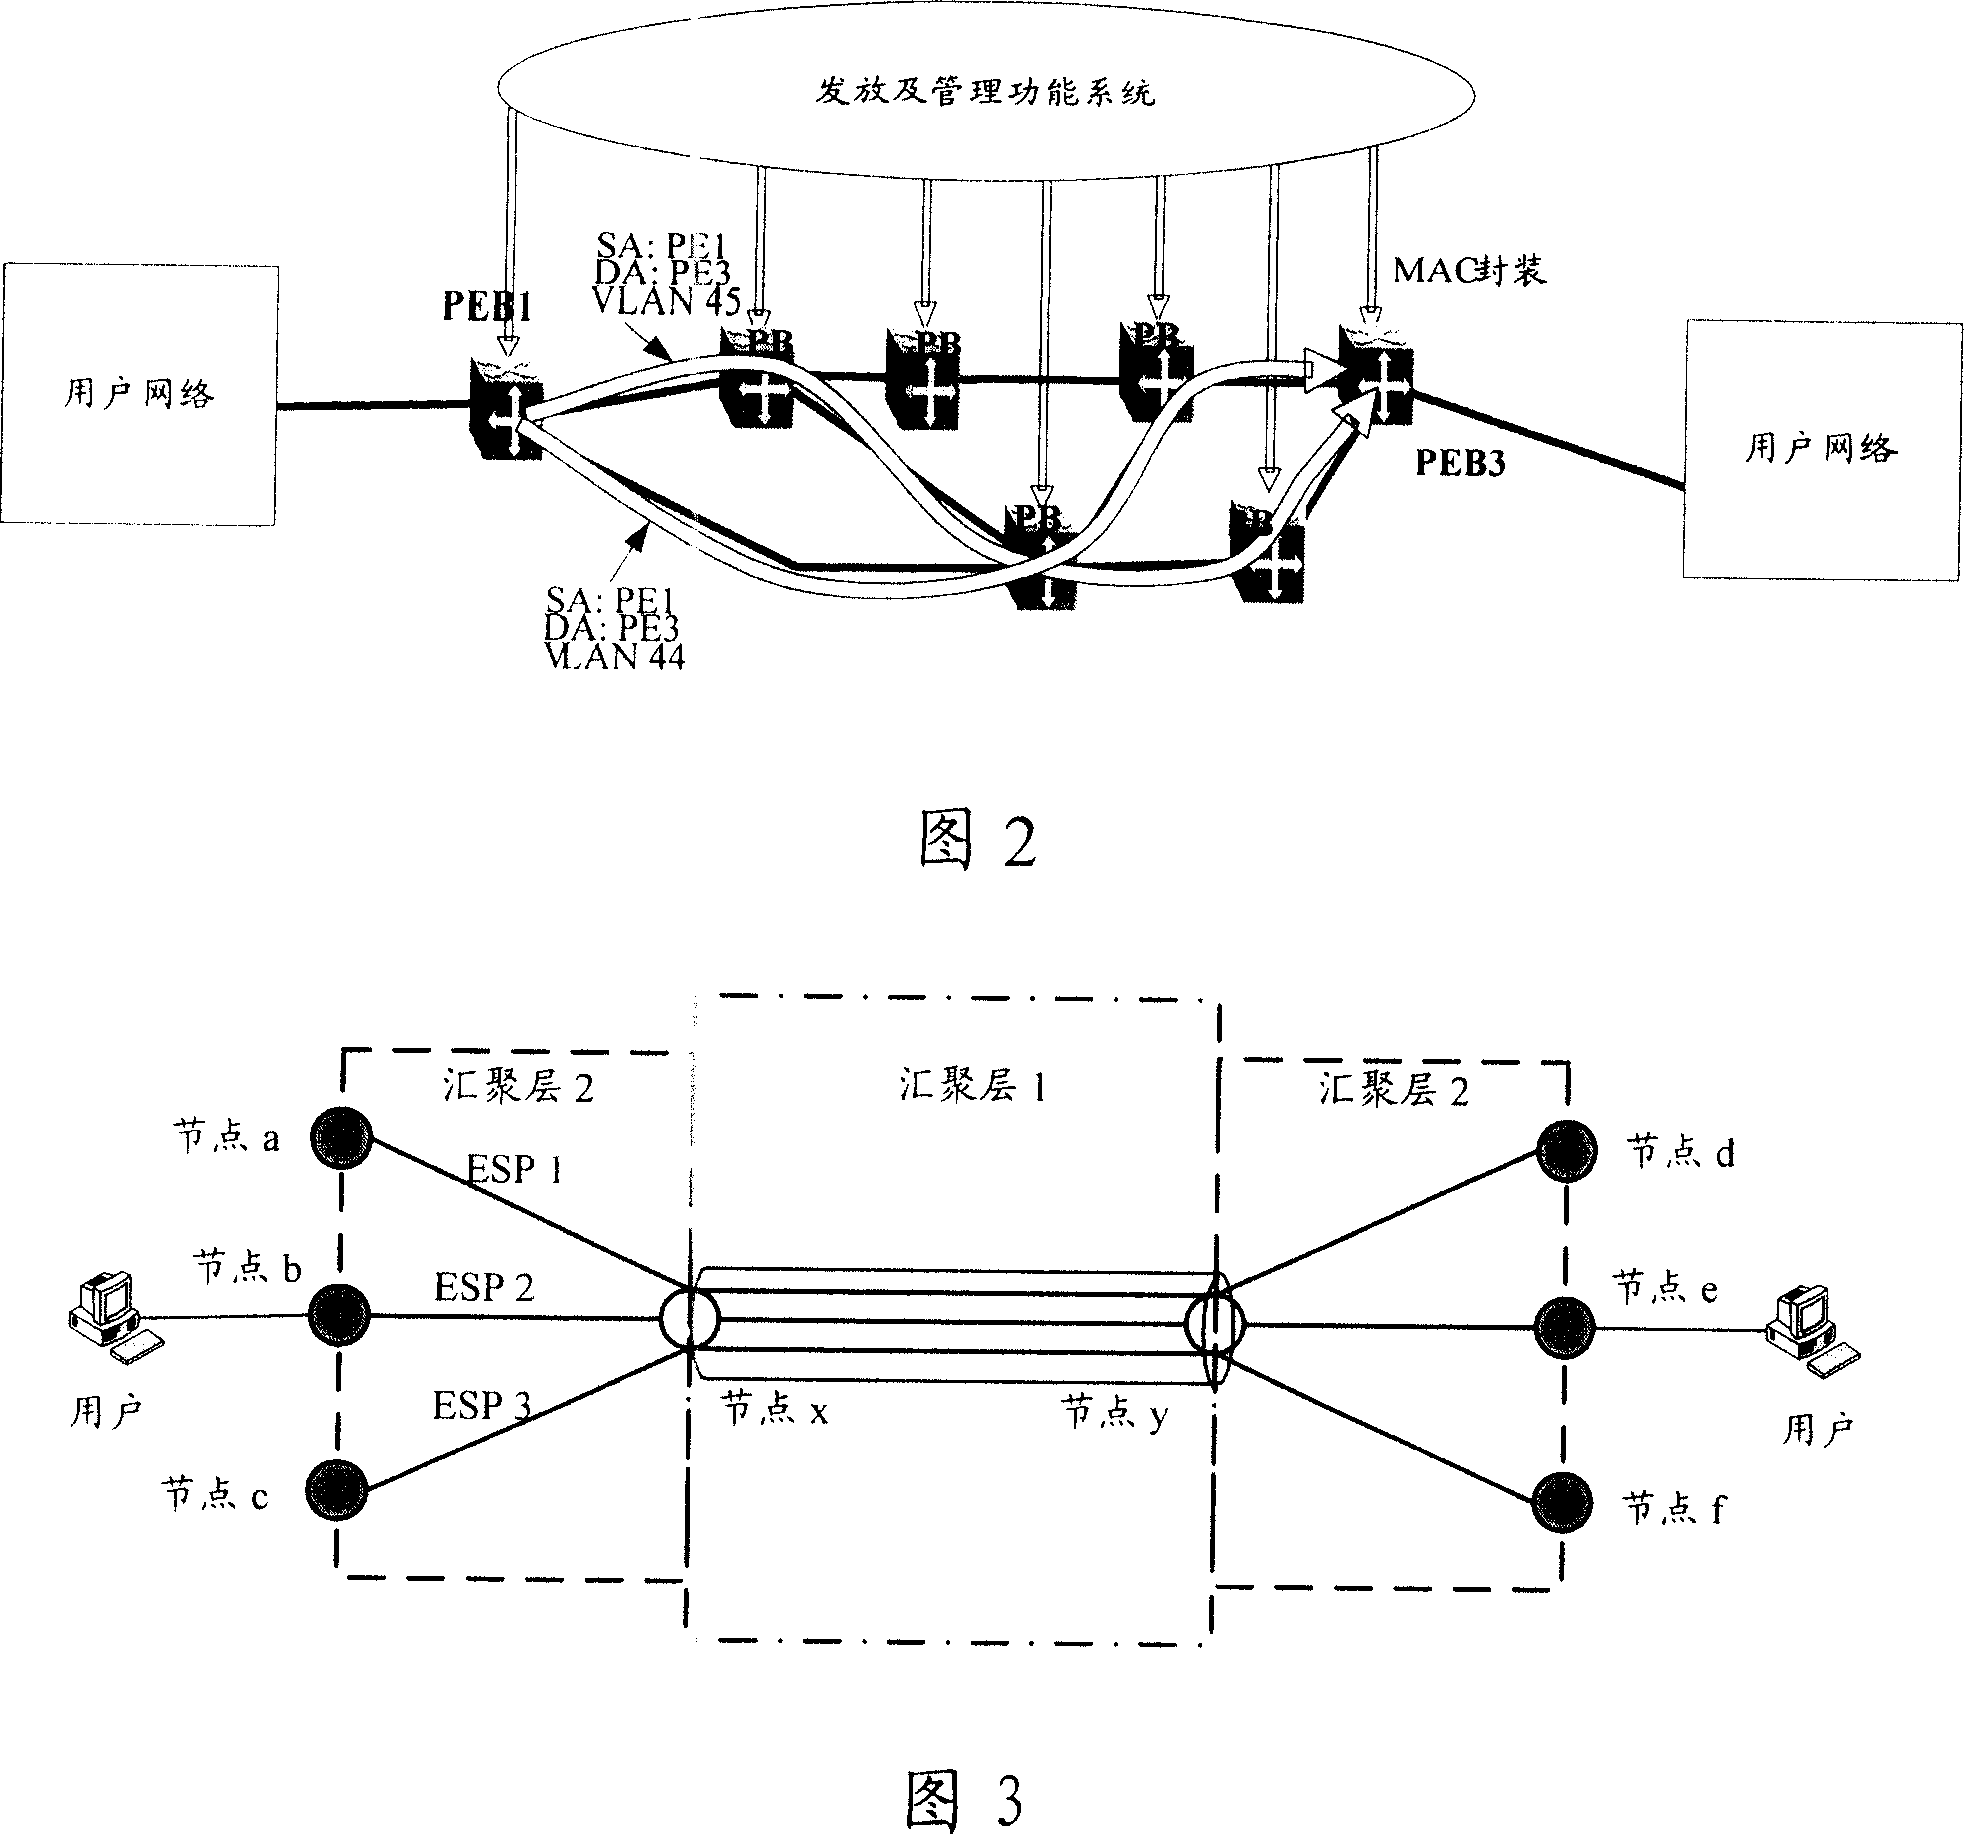 Method and system for implementing virtual gateway and virtual subnet